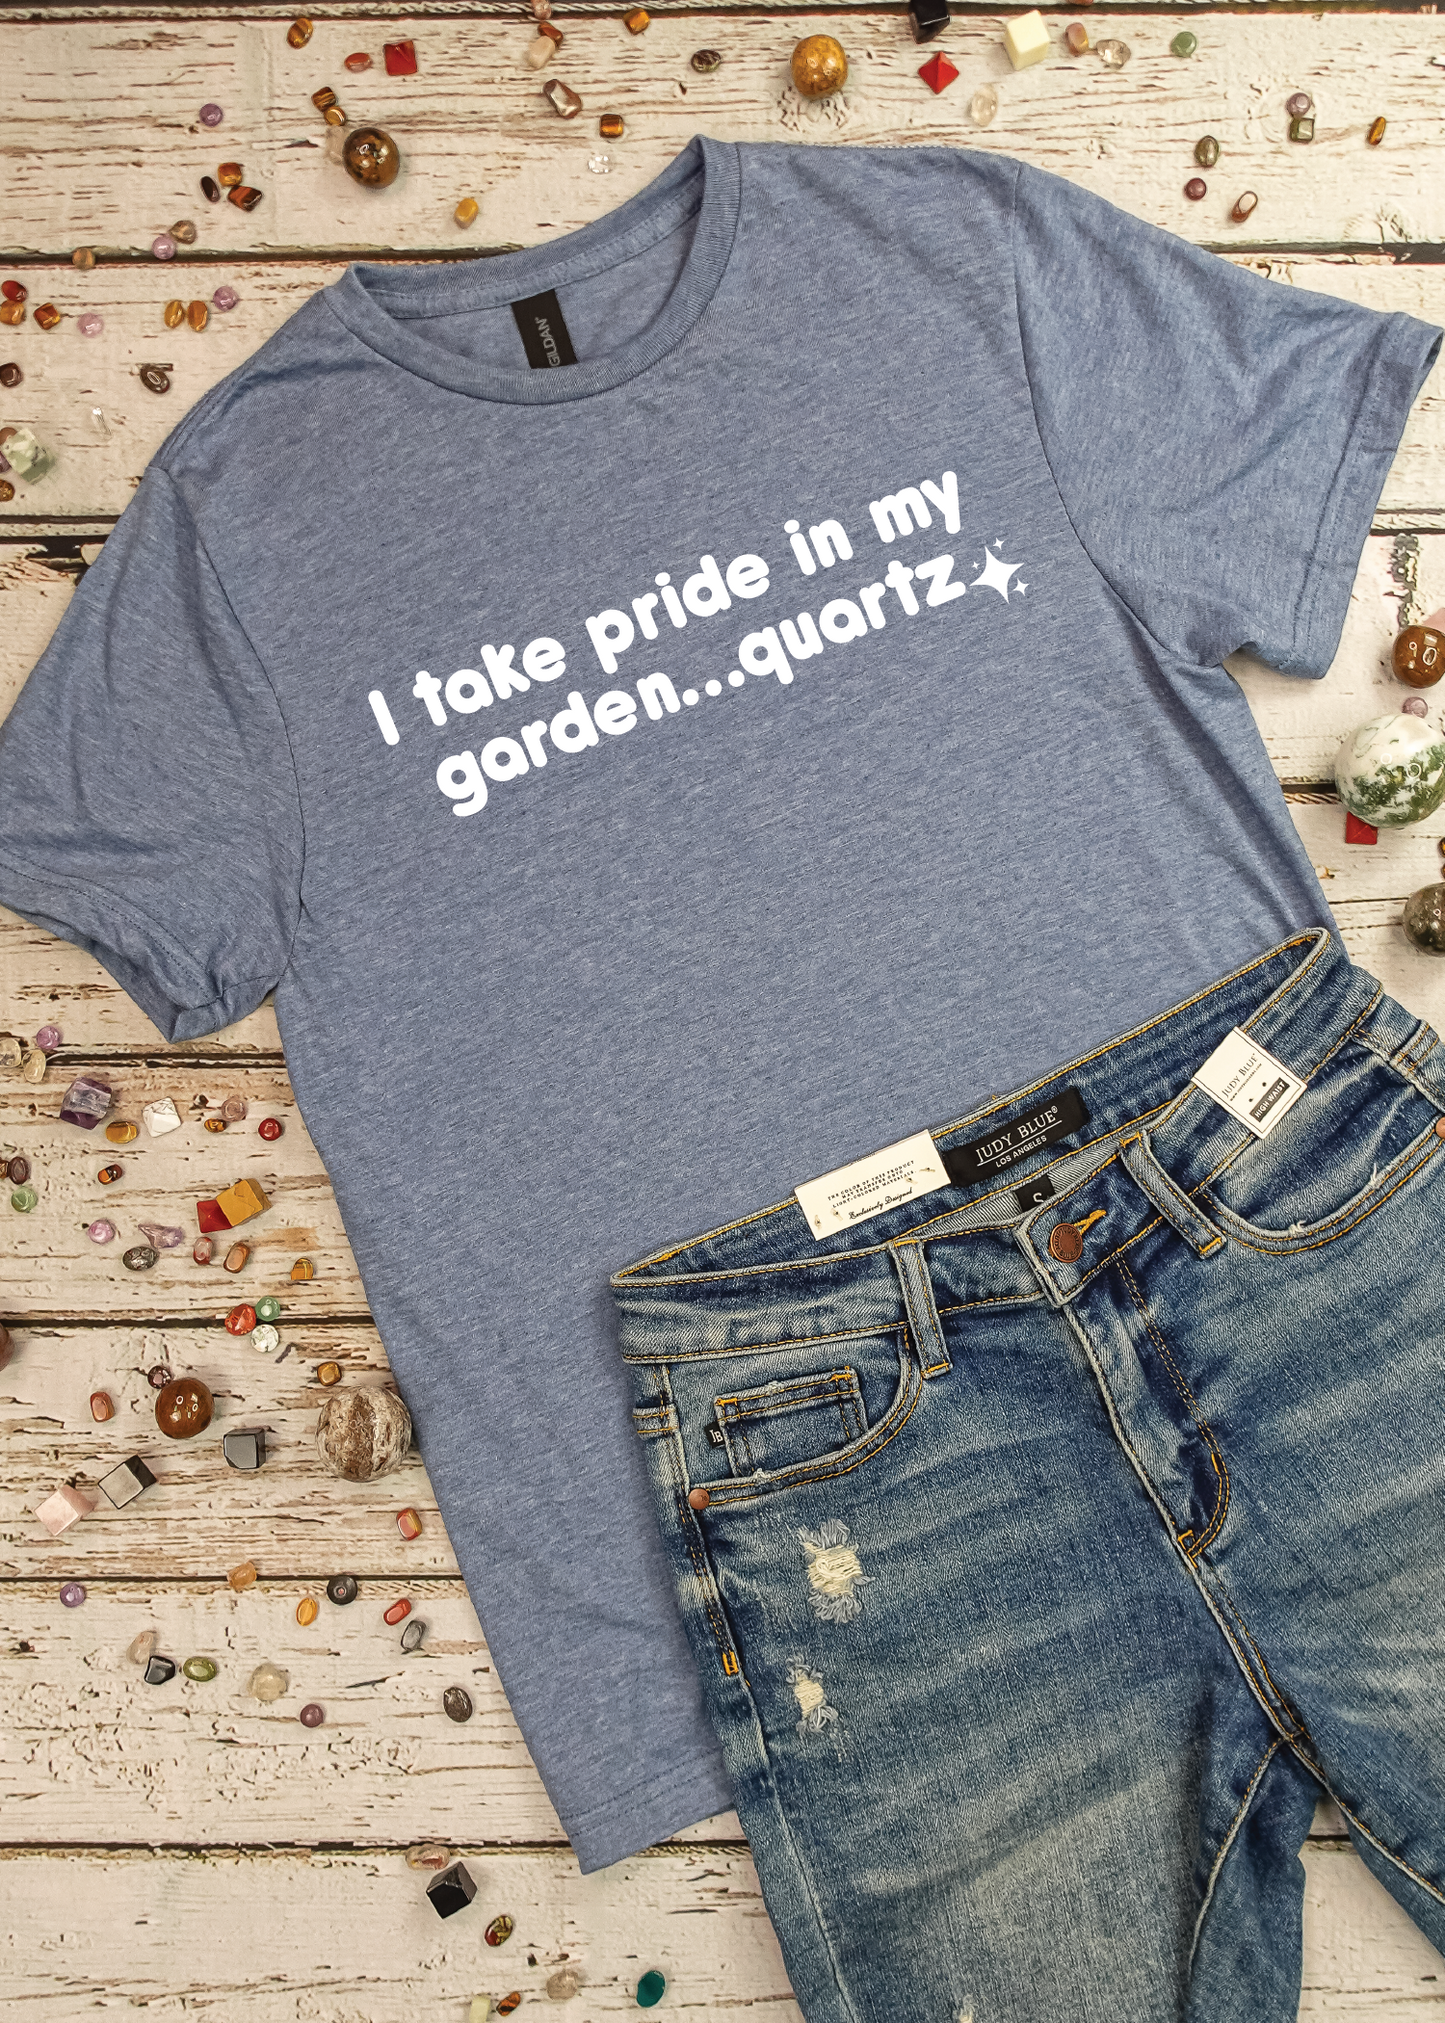 I Take Pride in my Garden - Graphic Tee